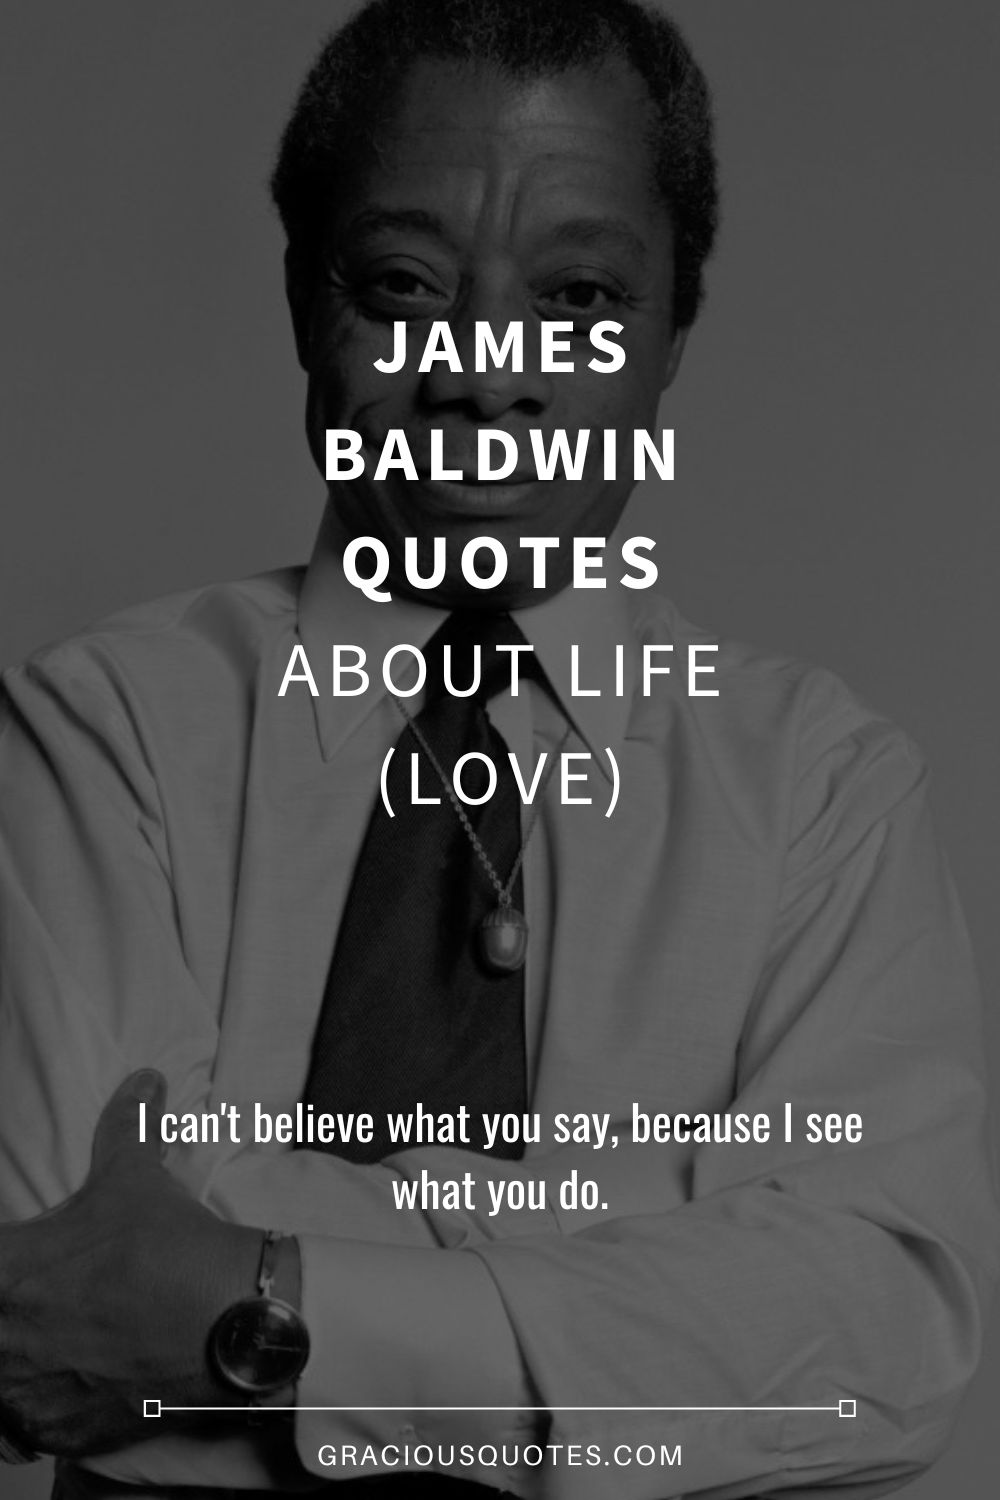 James Baldwin Quotes About Life (LOVE) - Gracious Quotes